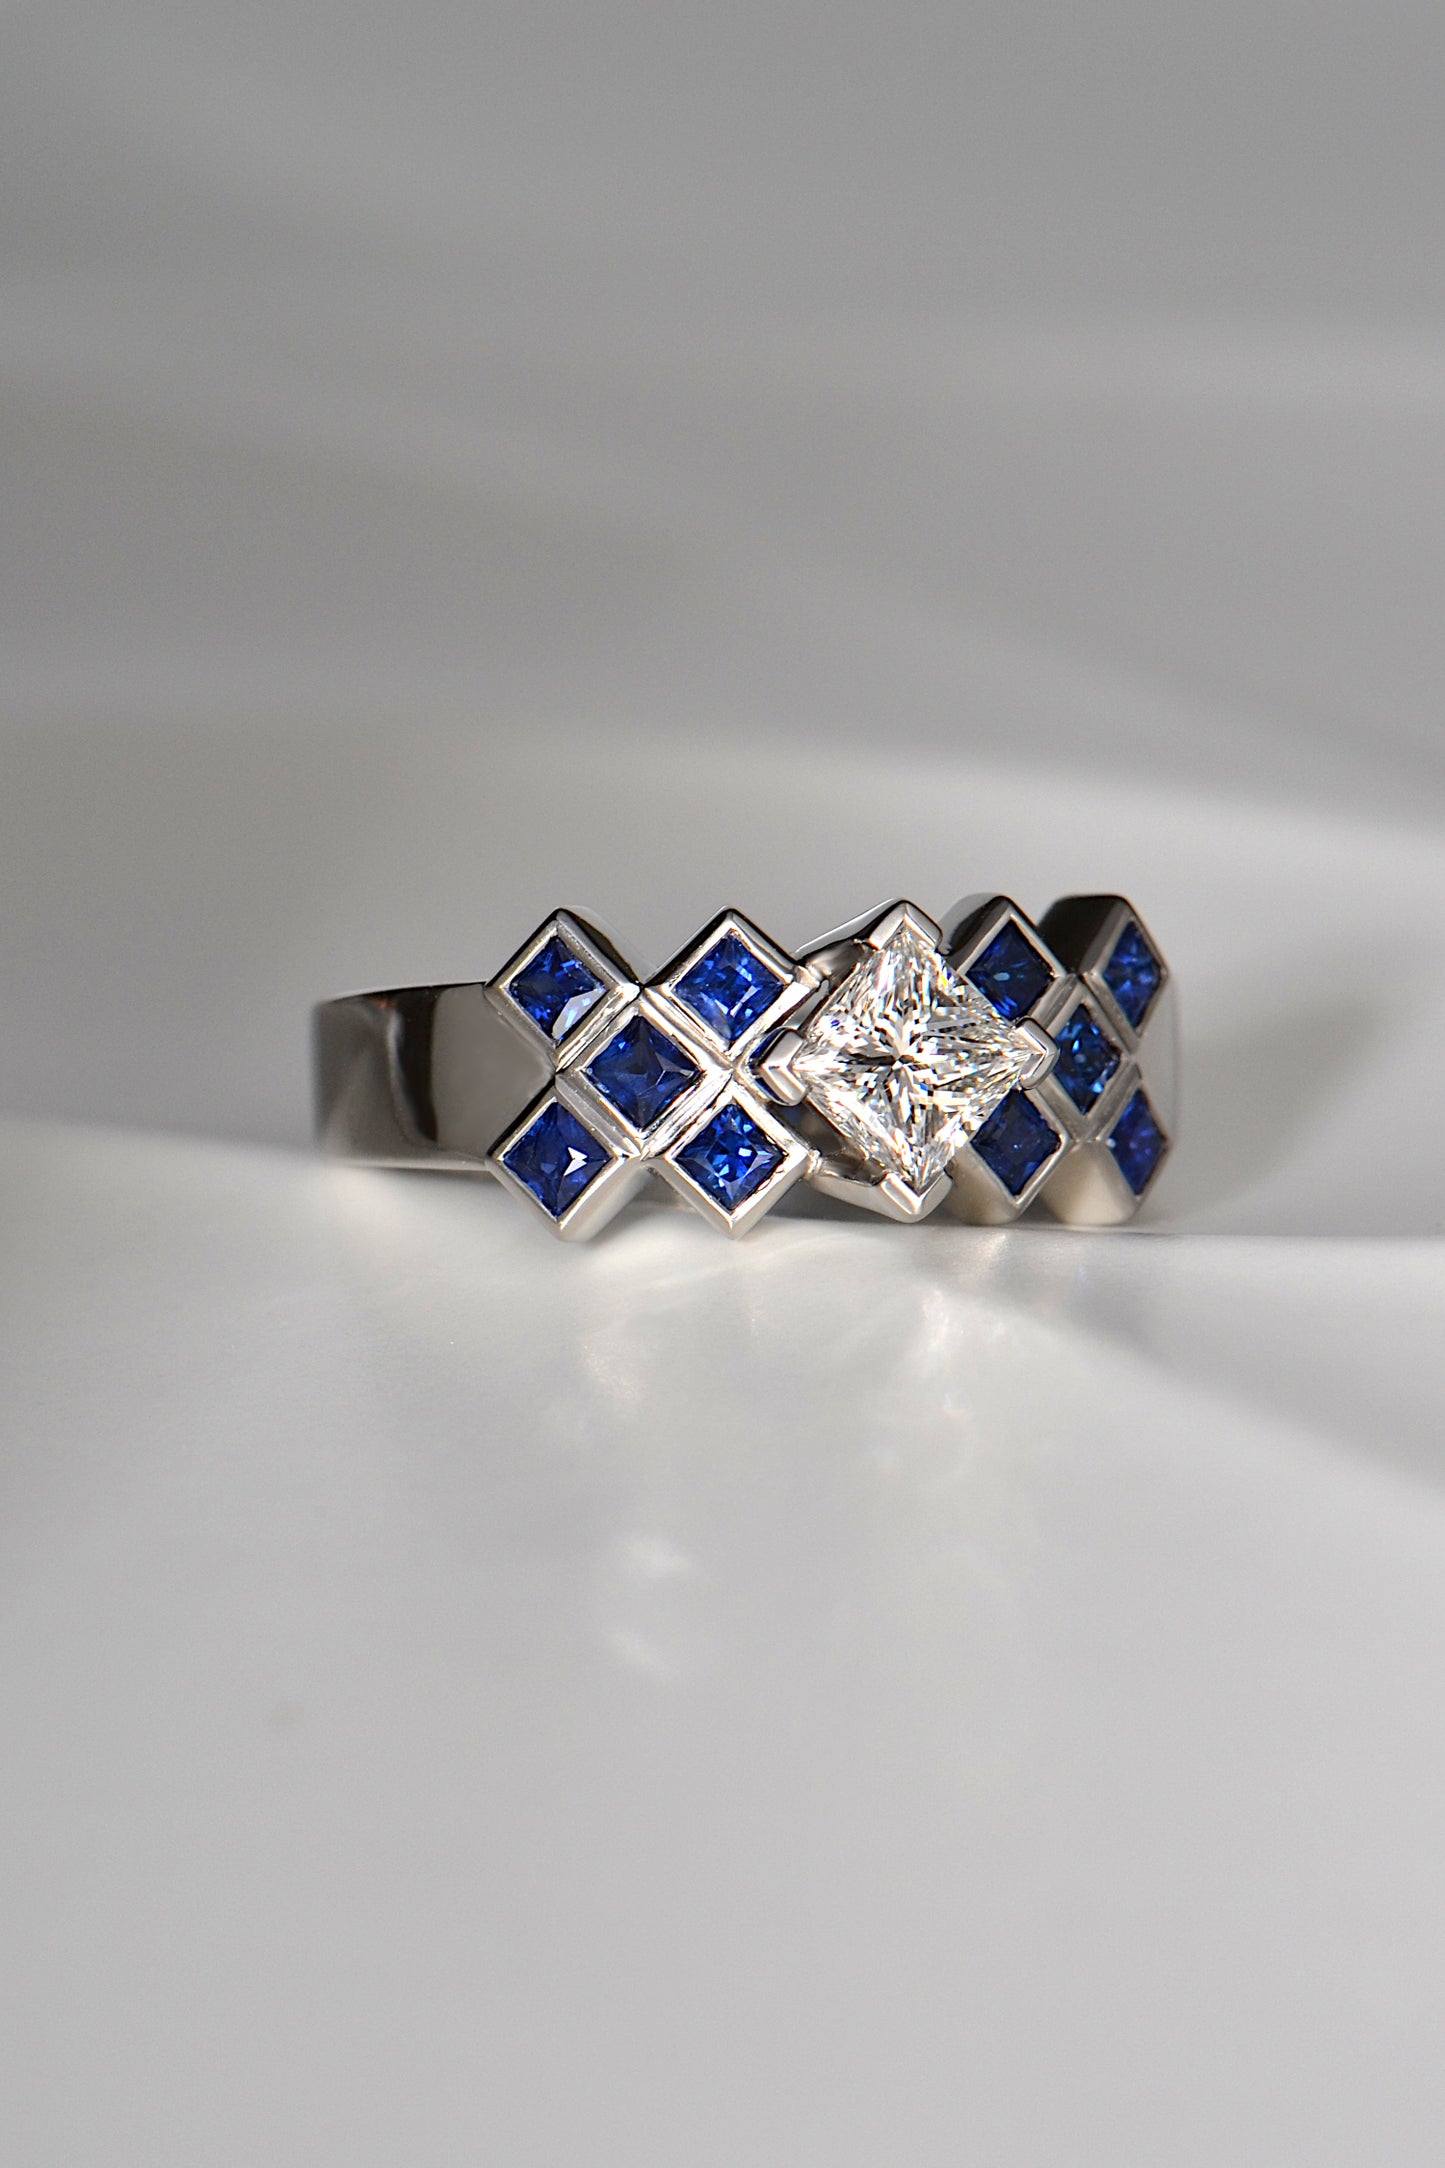 A large centre princess cut white diamond is set above a sea of square cut blue sapphires in a platinum engagement ring. There are ten sapphires in total, five on either side of the princess cut central diamond.